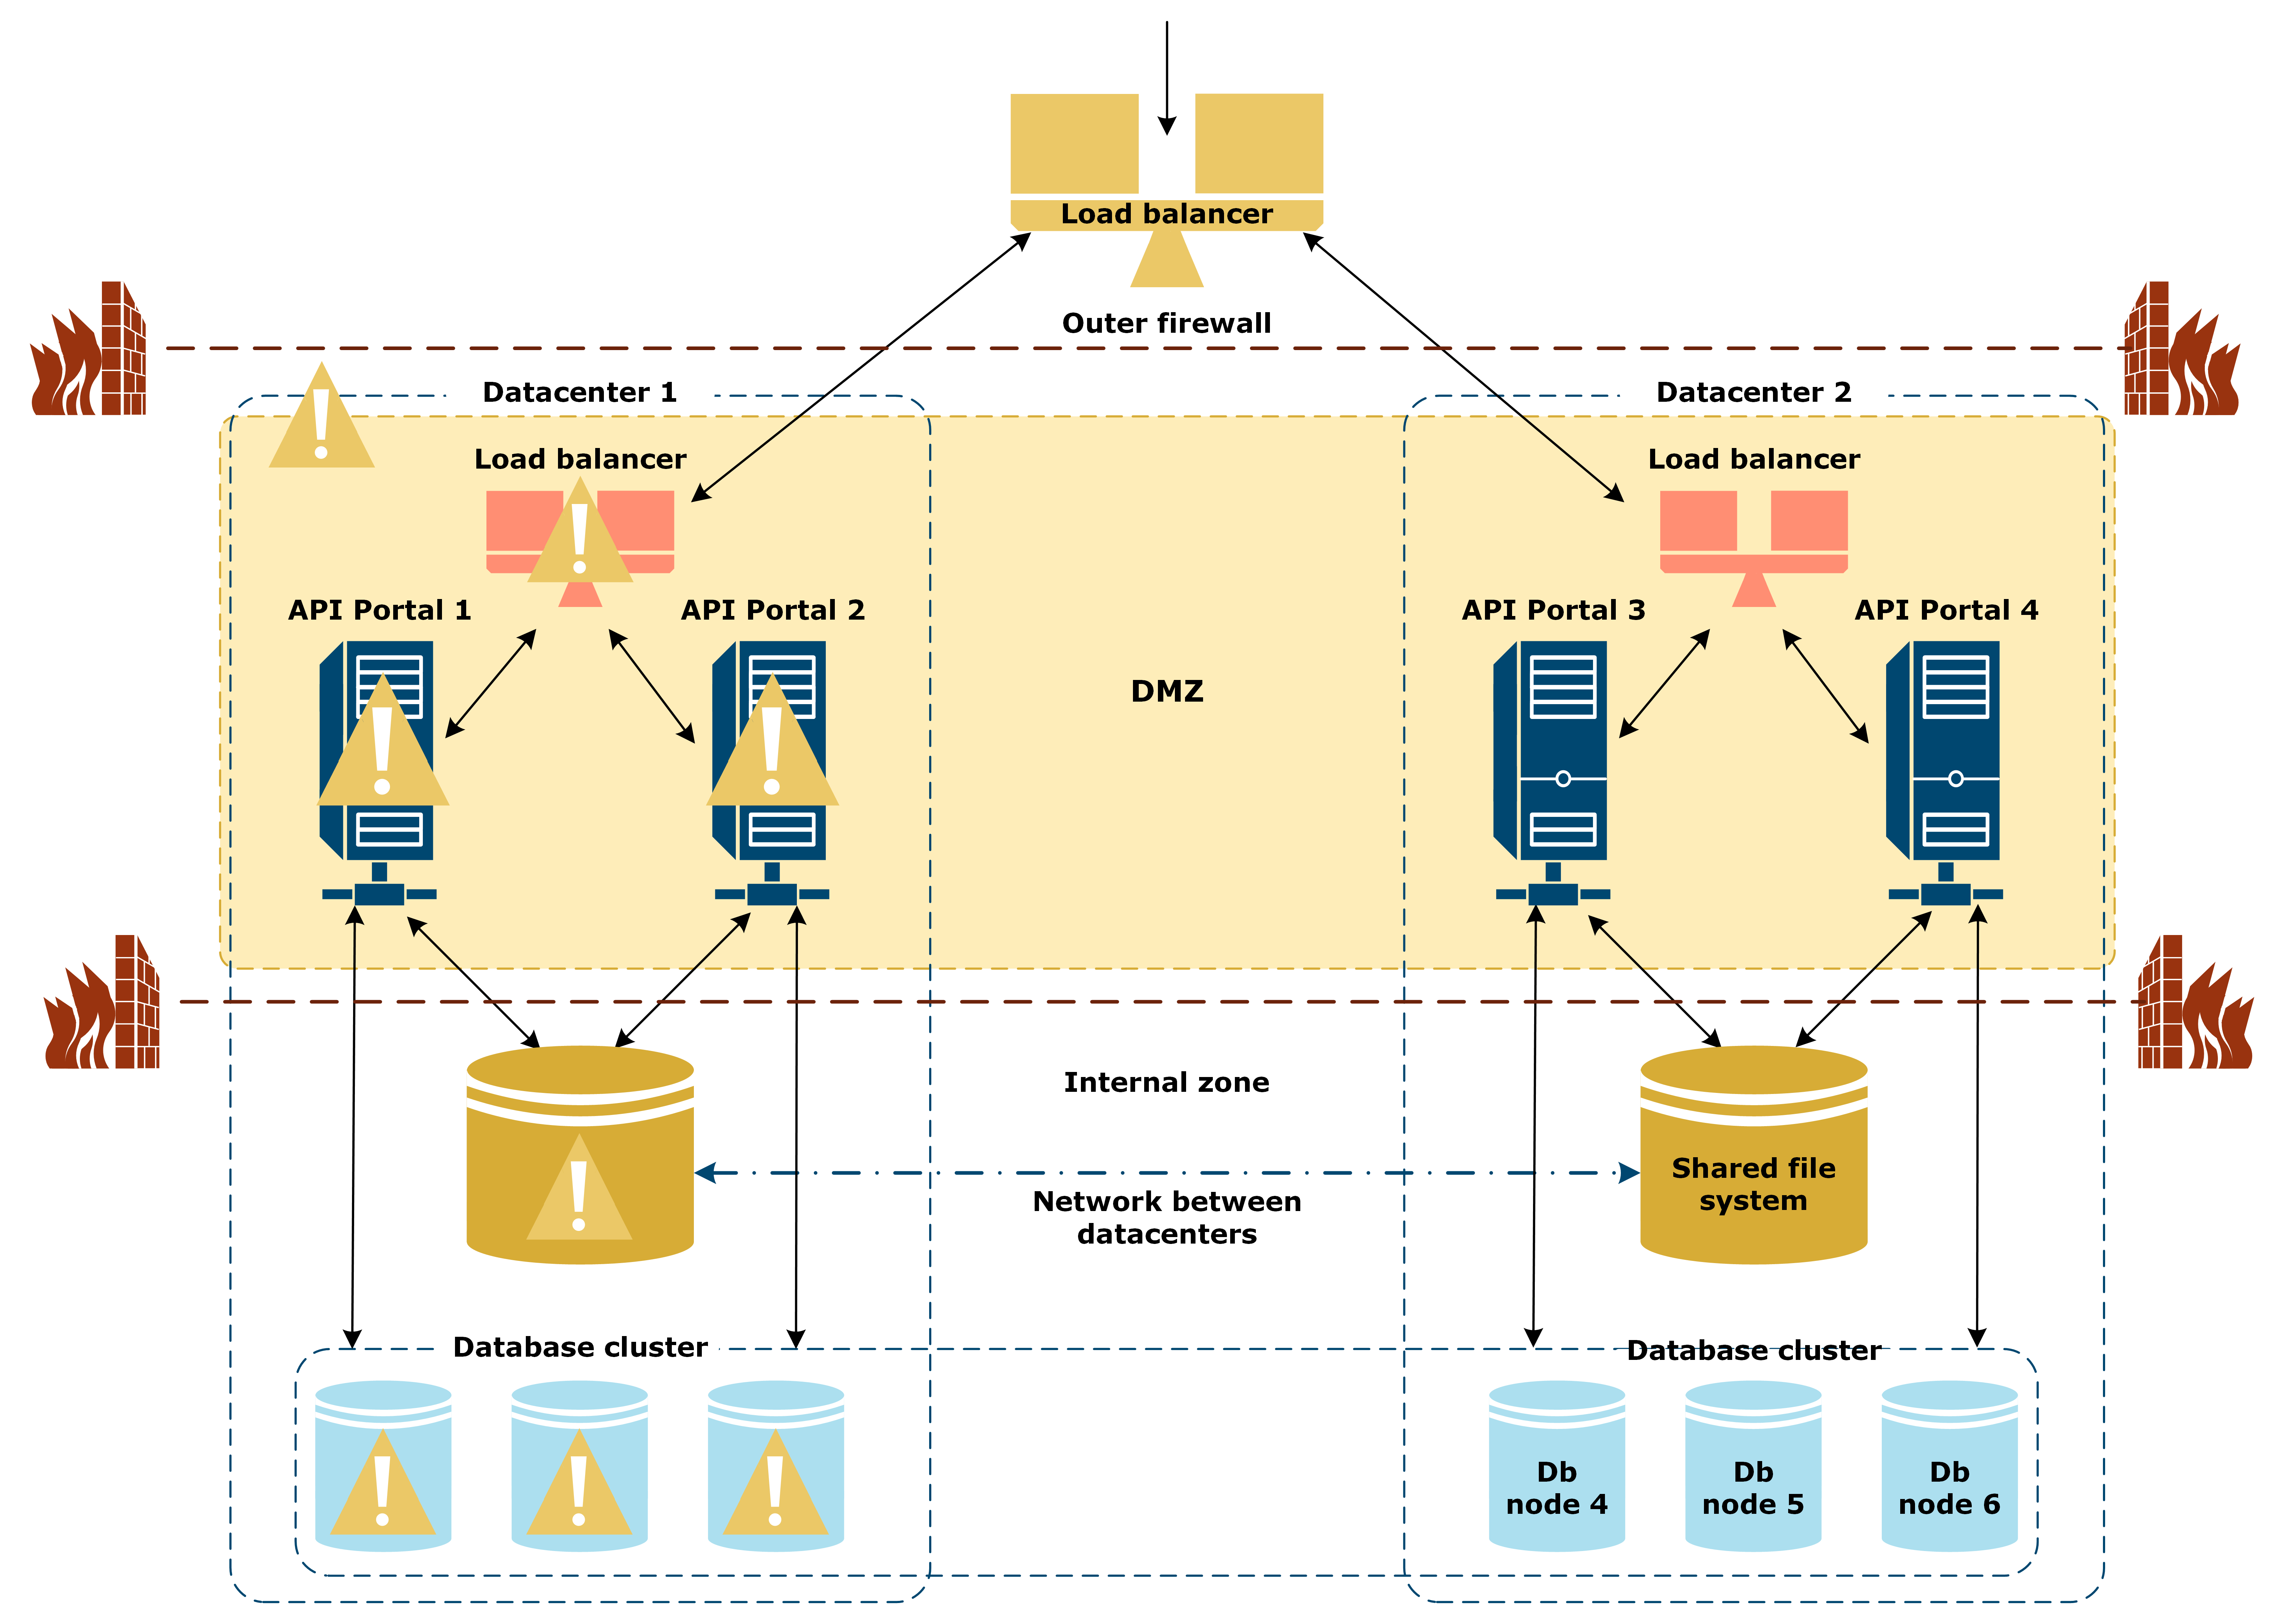 Illustration of the API Portal multi-datacenter reference architecture with one datacenter down